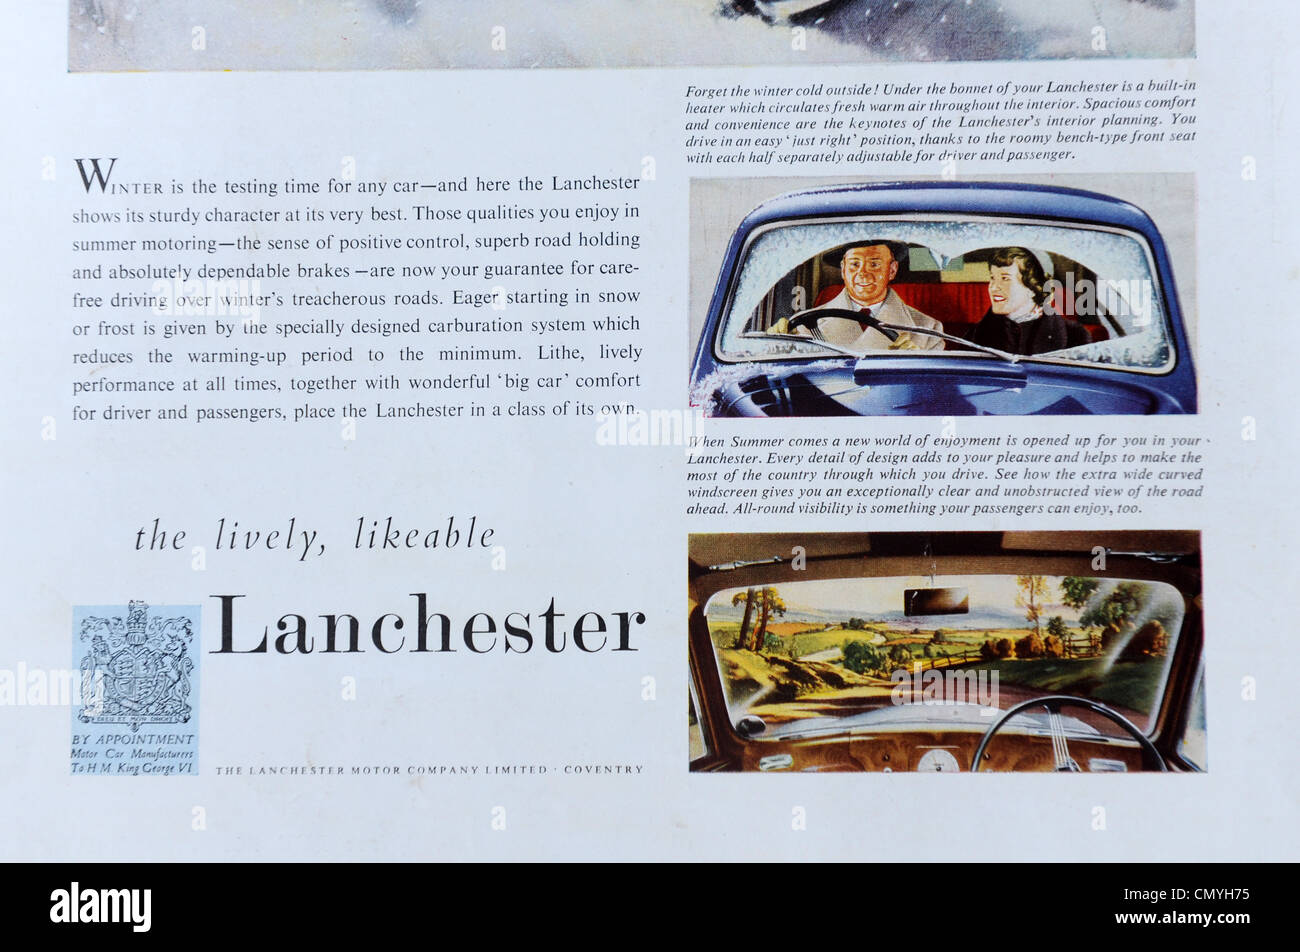 Lanchester car advert in The Illustrated London News 23/2/52 Stock Photo